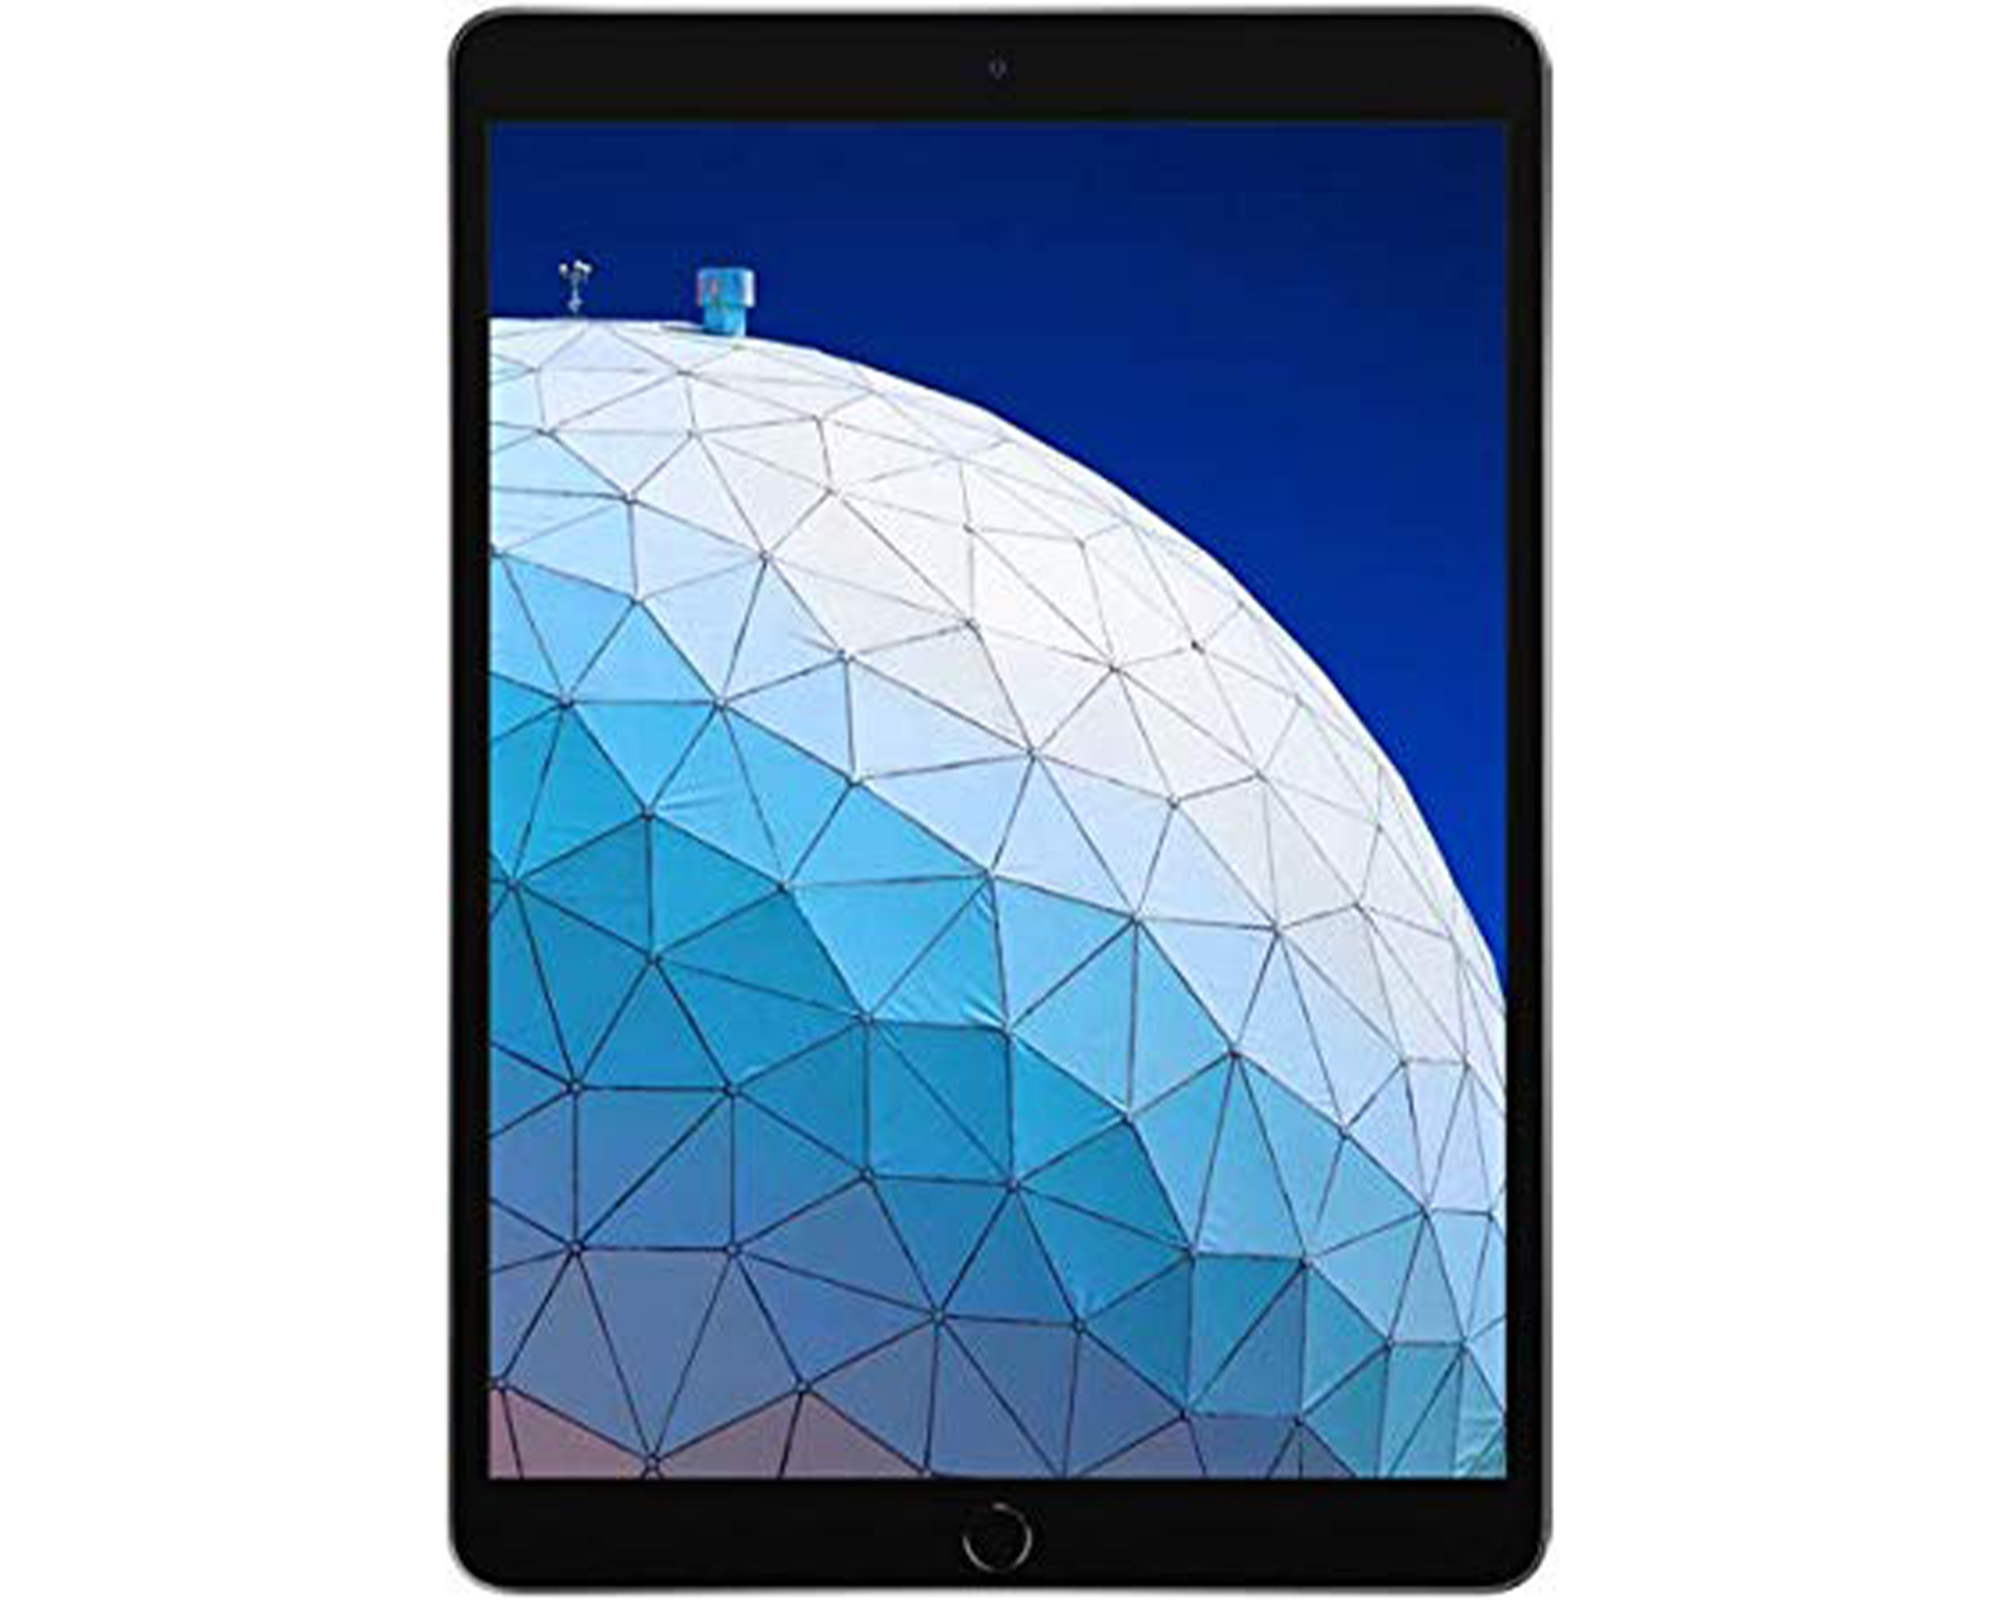 Restored Apple iPad Air 2 9.7-inch Space Gray Wi-Fi Only 64GB Bundle: Case, Pre-Installed Tempered Glass, Rapid Charger, Bluetooth/Wireless Airbuds By Certified 2 Day Express (Refurbished) - image 5 of 8